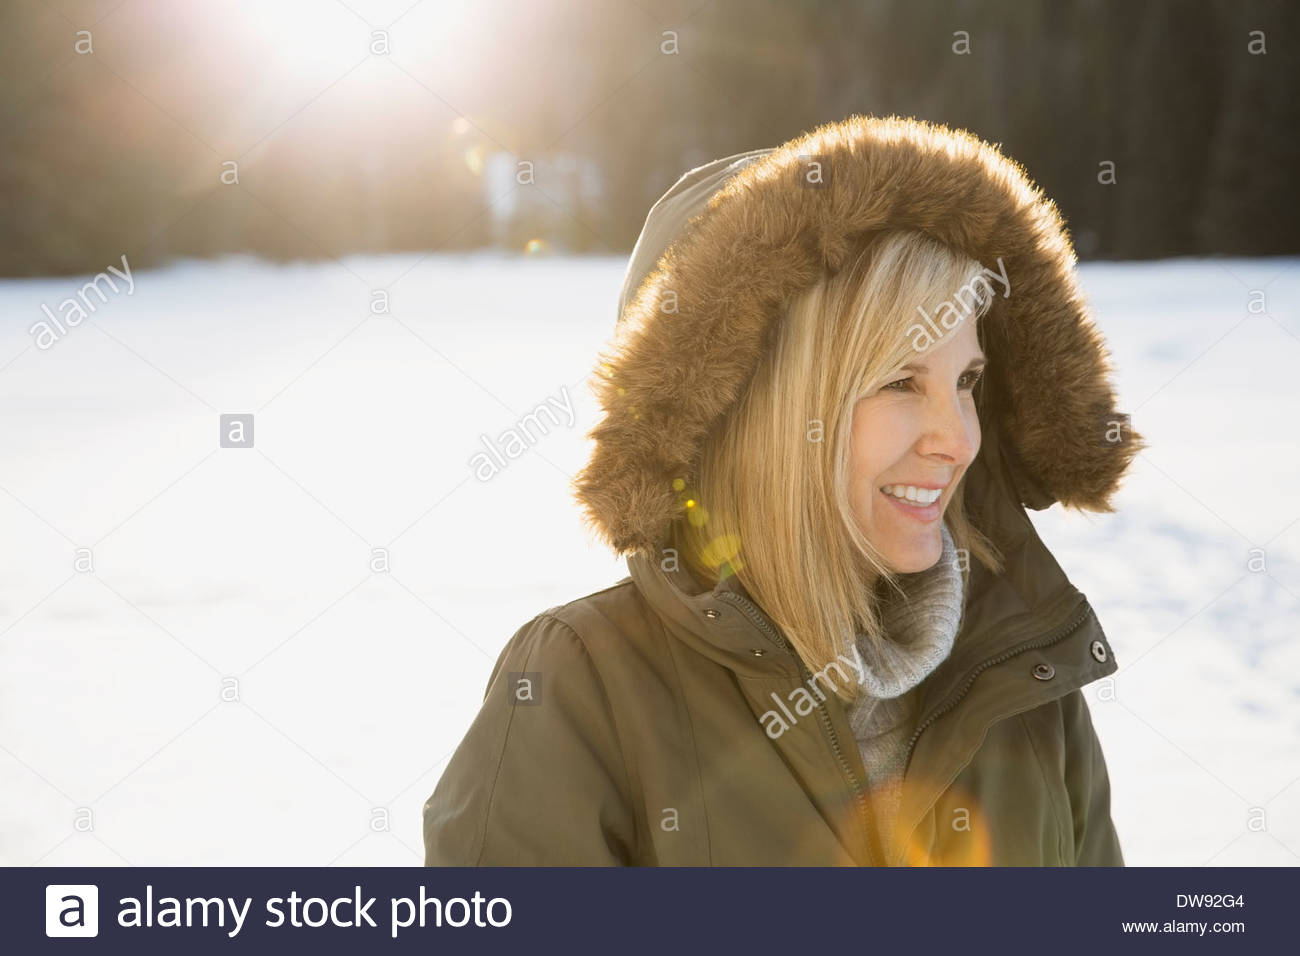 Woman in fur hooded jacket smiling outdoors Stock Photo